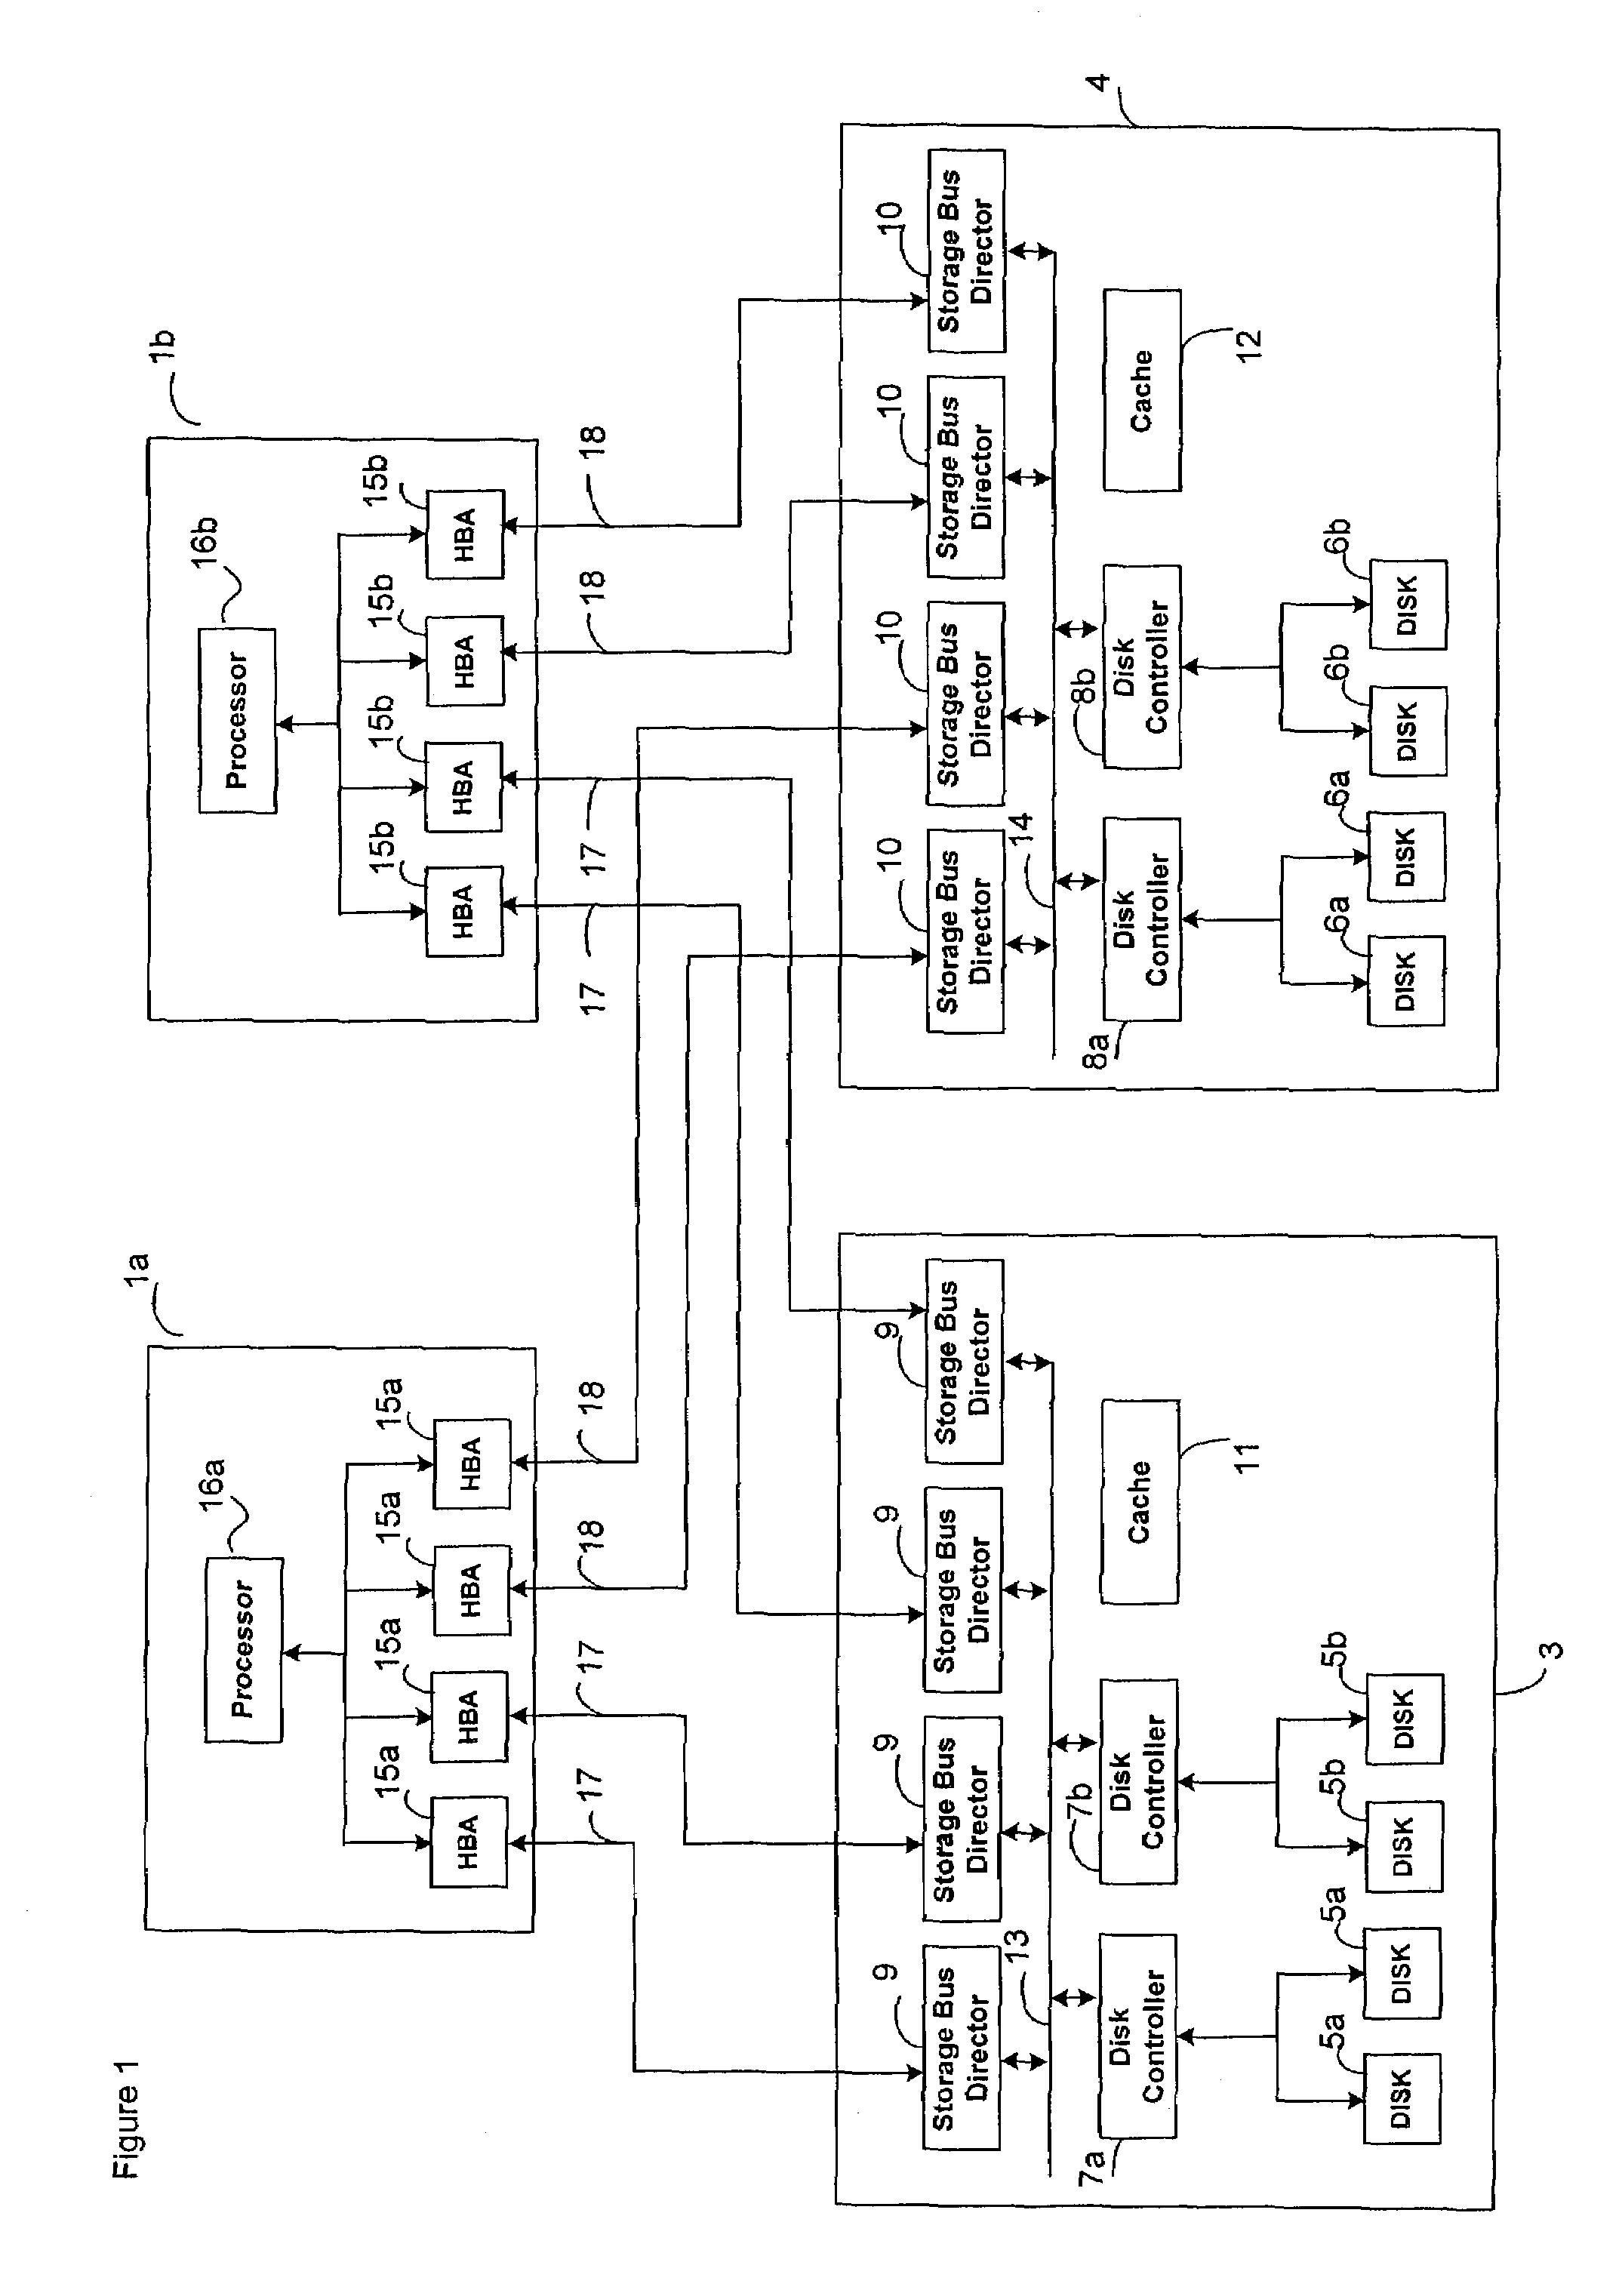 Method and apparatus for managing migration of data in a clustered computer system environment